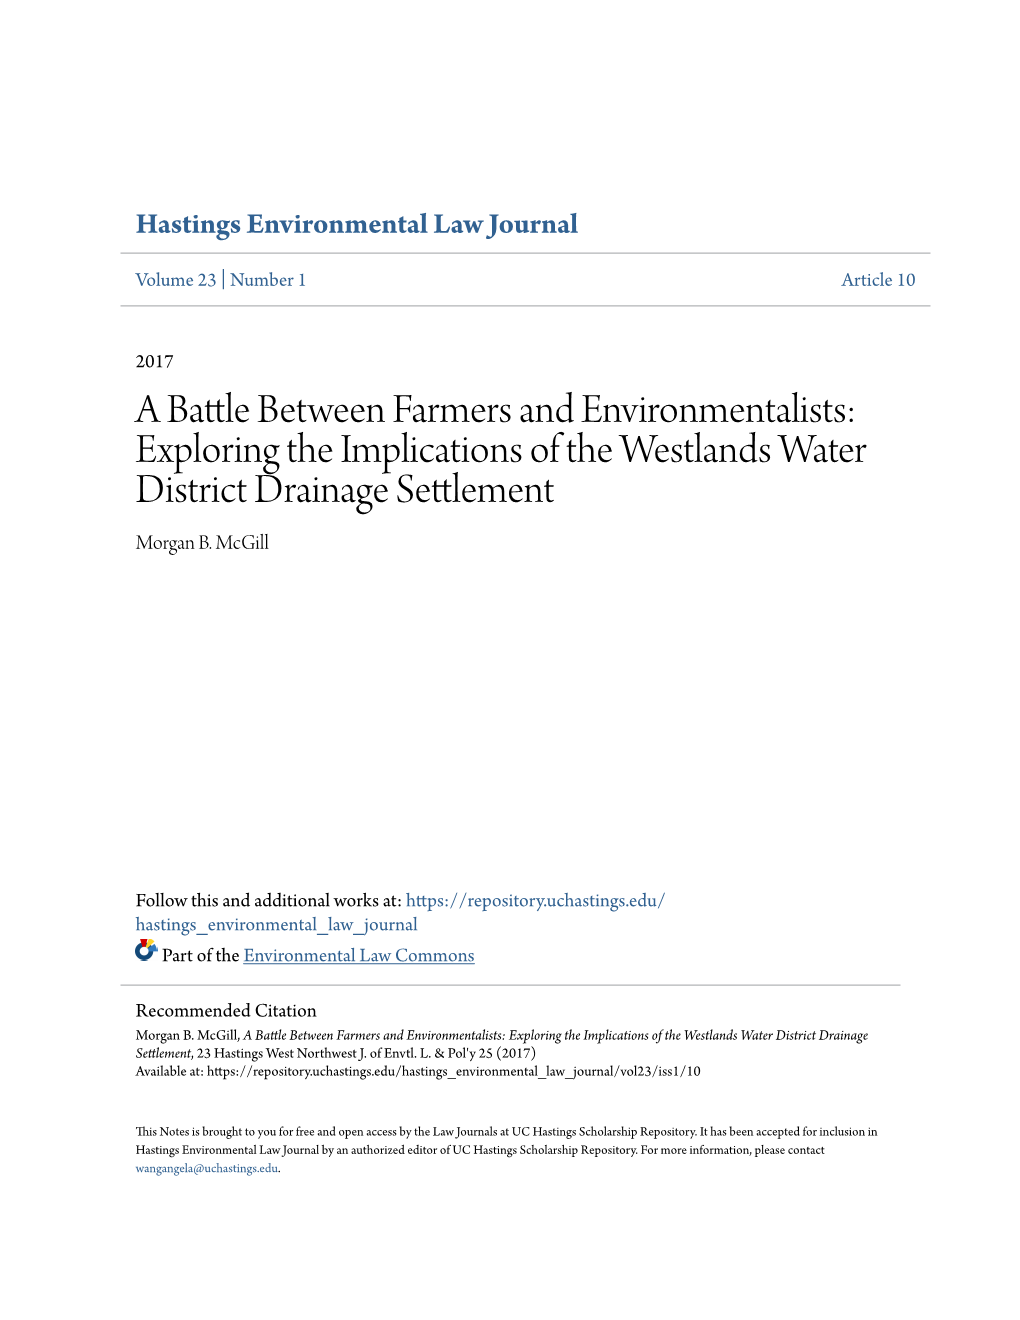 Exploring the Implications of the Westlands Water District Drainage Settlement Morgan B